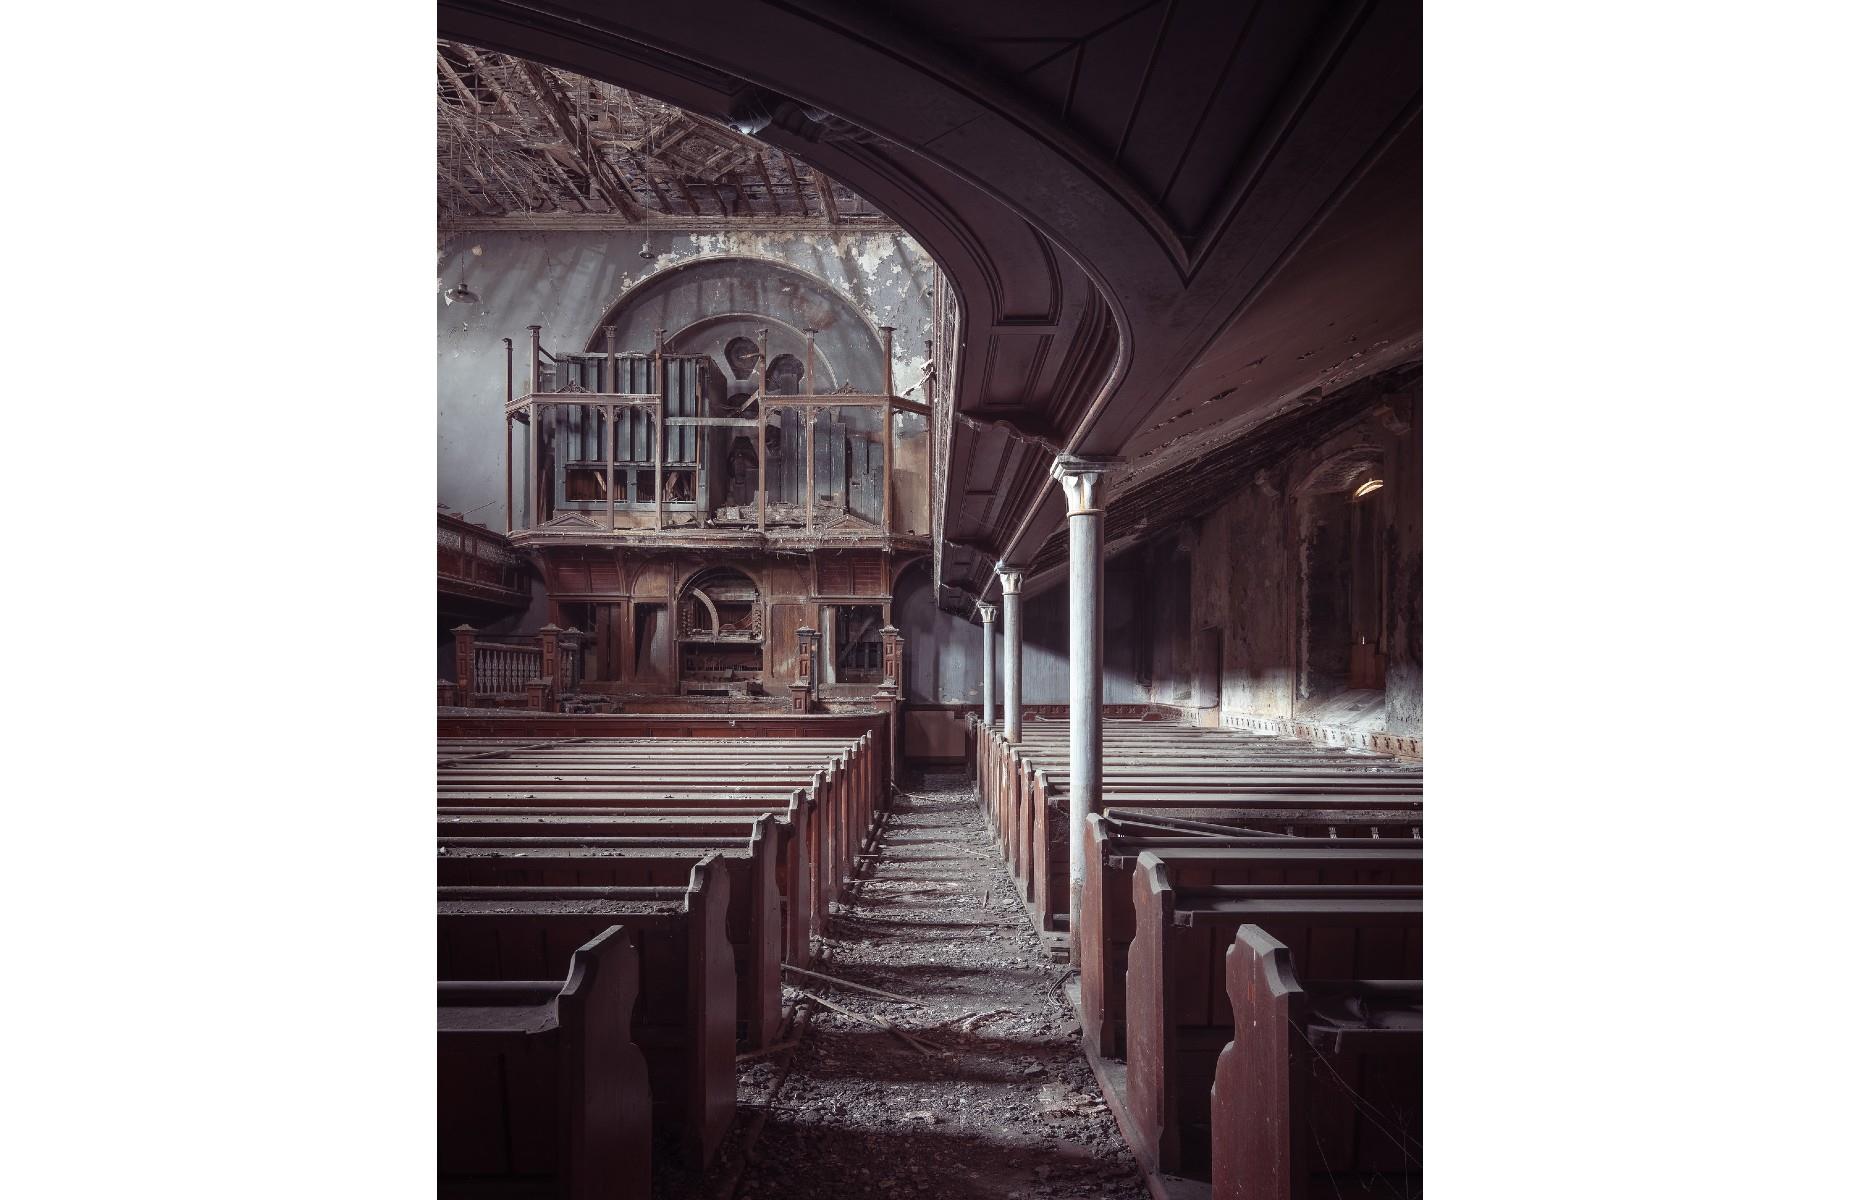 <p>Now derelict, the Grade II-listed Calfaria Baptist Chapel in Llanelli was built in 1881 and was once a thriving community hub, but has lain empty for the last two decades. Paul Harris reveals its eerie beauty in this atmospheric shot, revealing the dusty floors, crumbling wooden pillars and dilapidated ceiling – we wouldn't want to get caught here alone...</p>  <p><a href="https://www.loveexploring.com/galleries/86634/haunting-photos-of-the-worlds-abandoned-sacred-places?page=1"><strong>Haunting photos of the world's abandoned sacred places</strong></a></p>